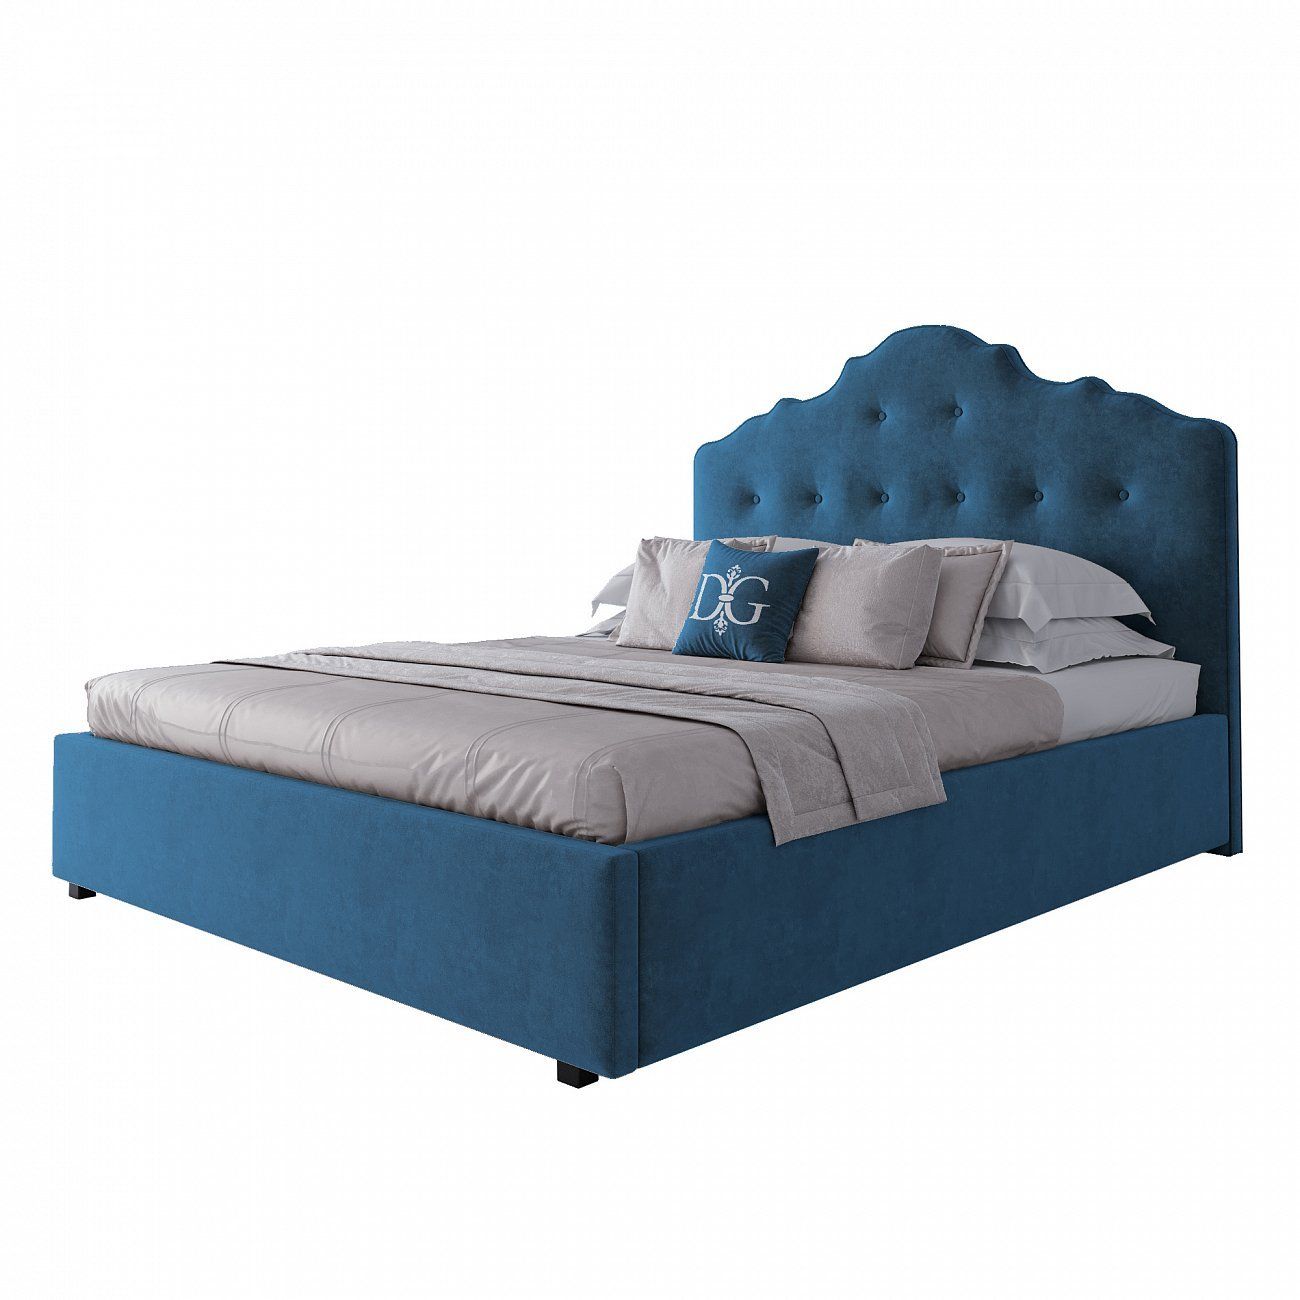 Double bed 160x200 Sea Wave Palace